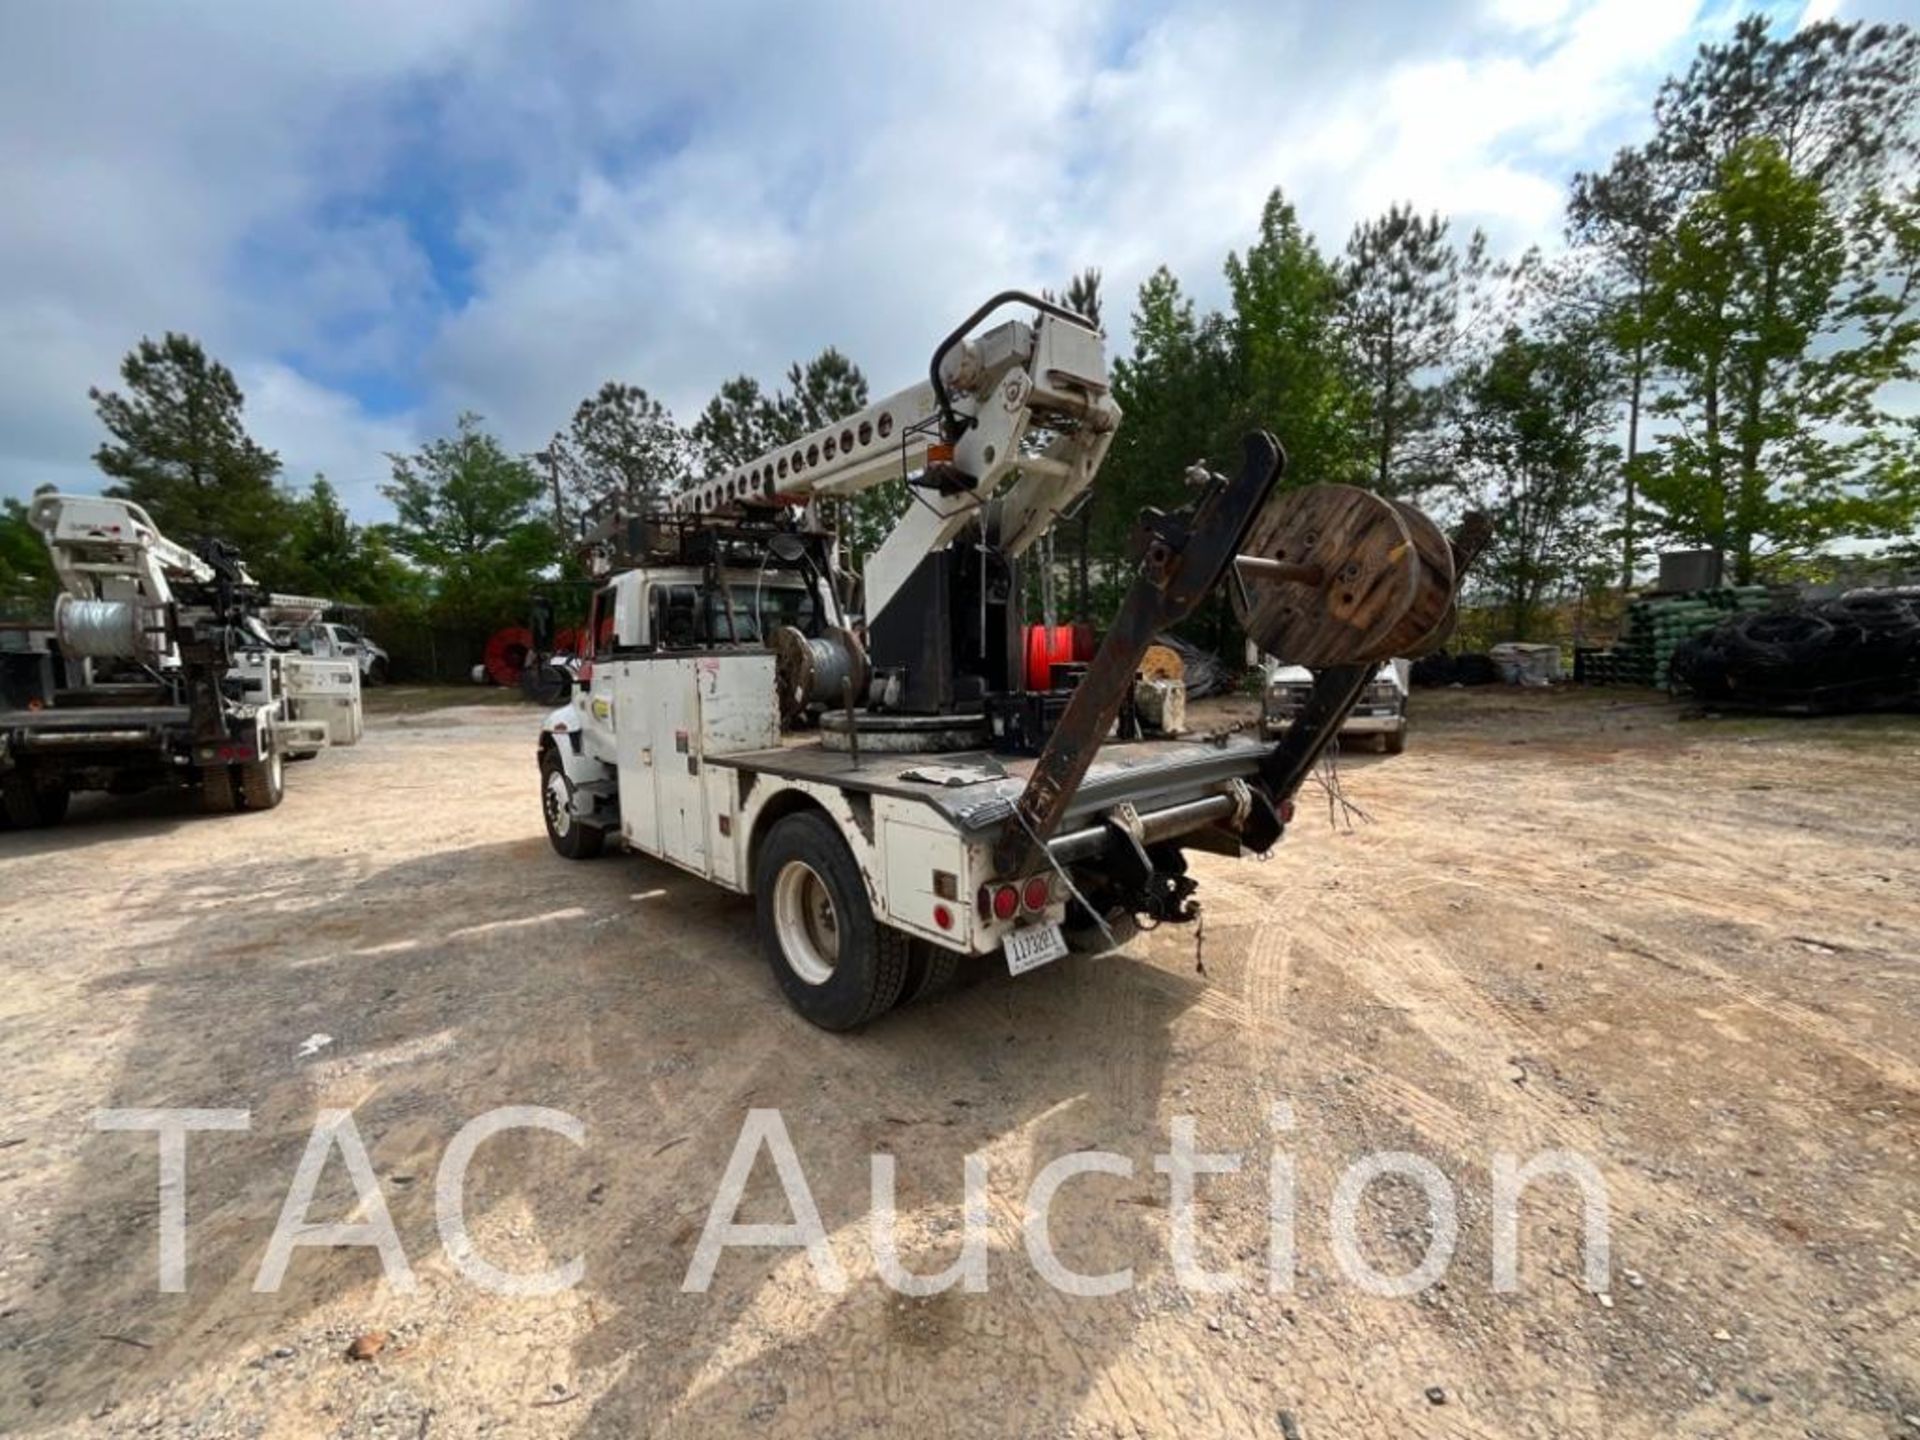 2006 International 4300 Cable Placer Bucket Truck - Image 3 of 64